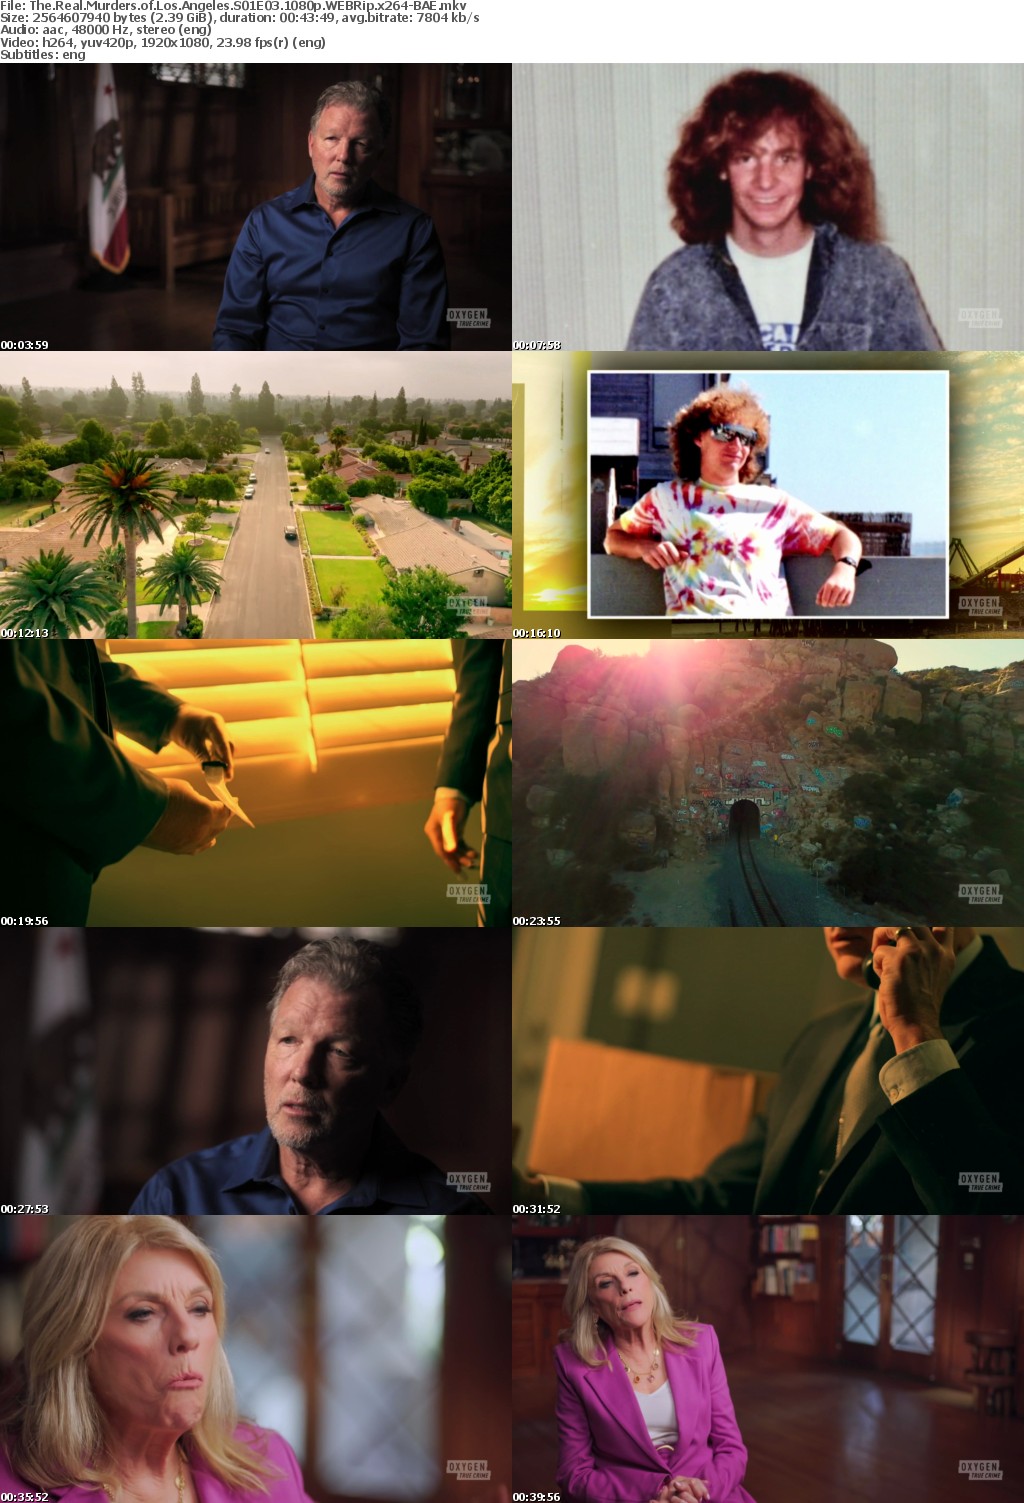 The Real Murders of Los Angeles S01E03 1080p WEBRip x264-BAE